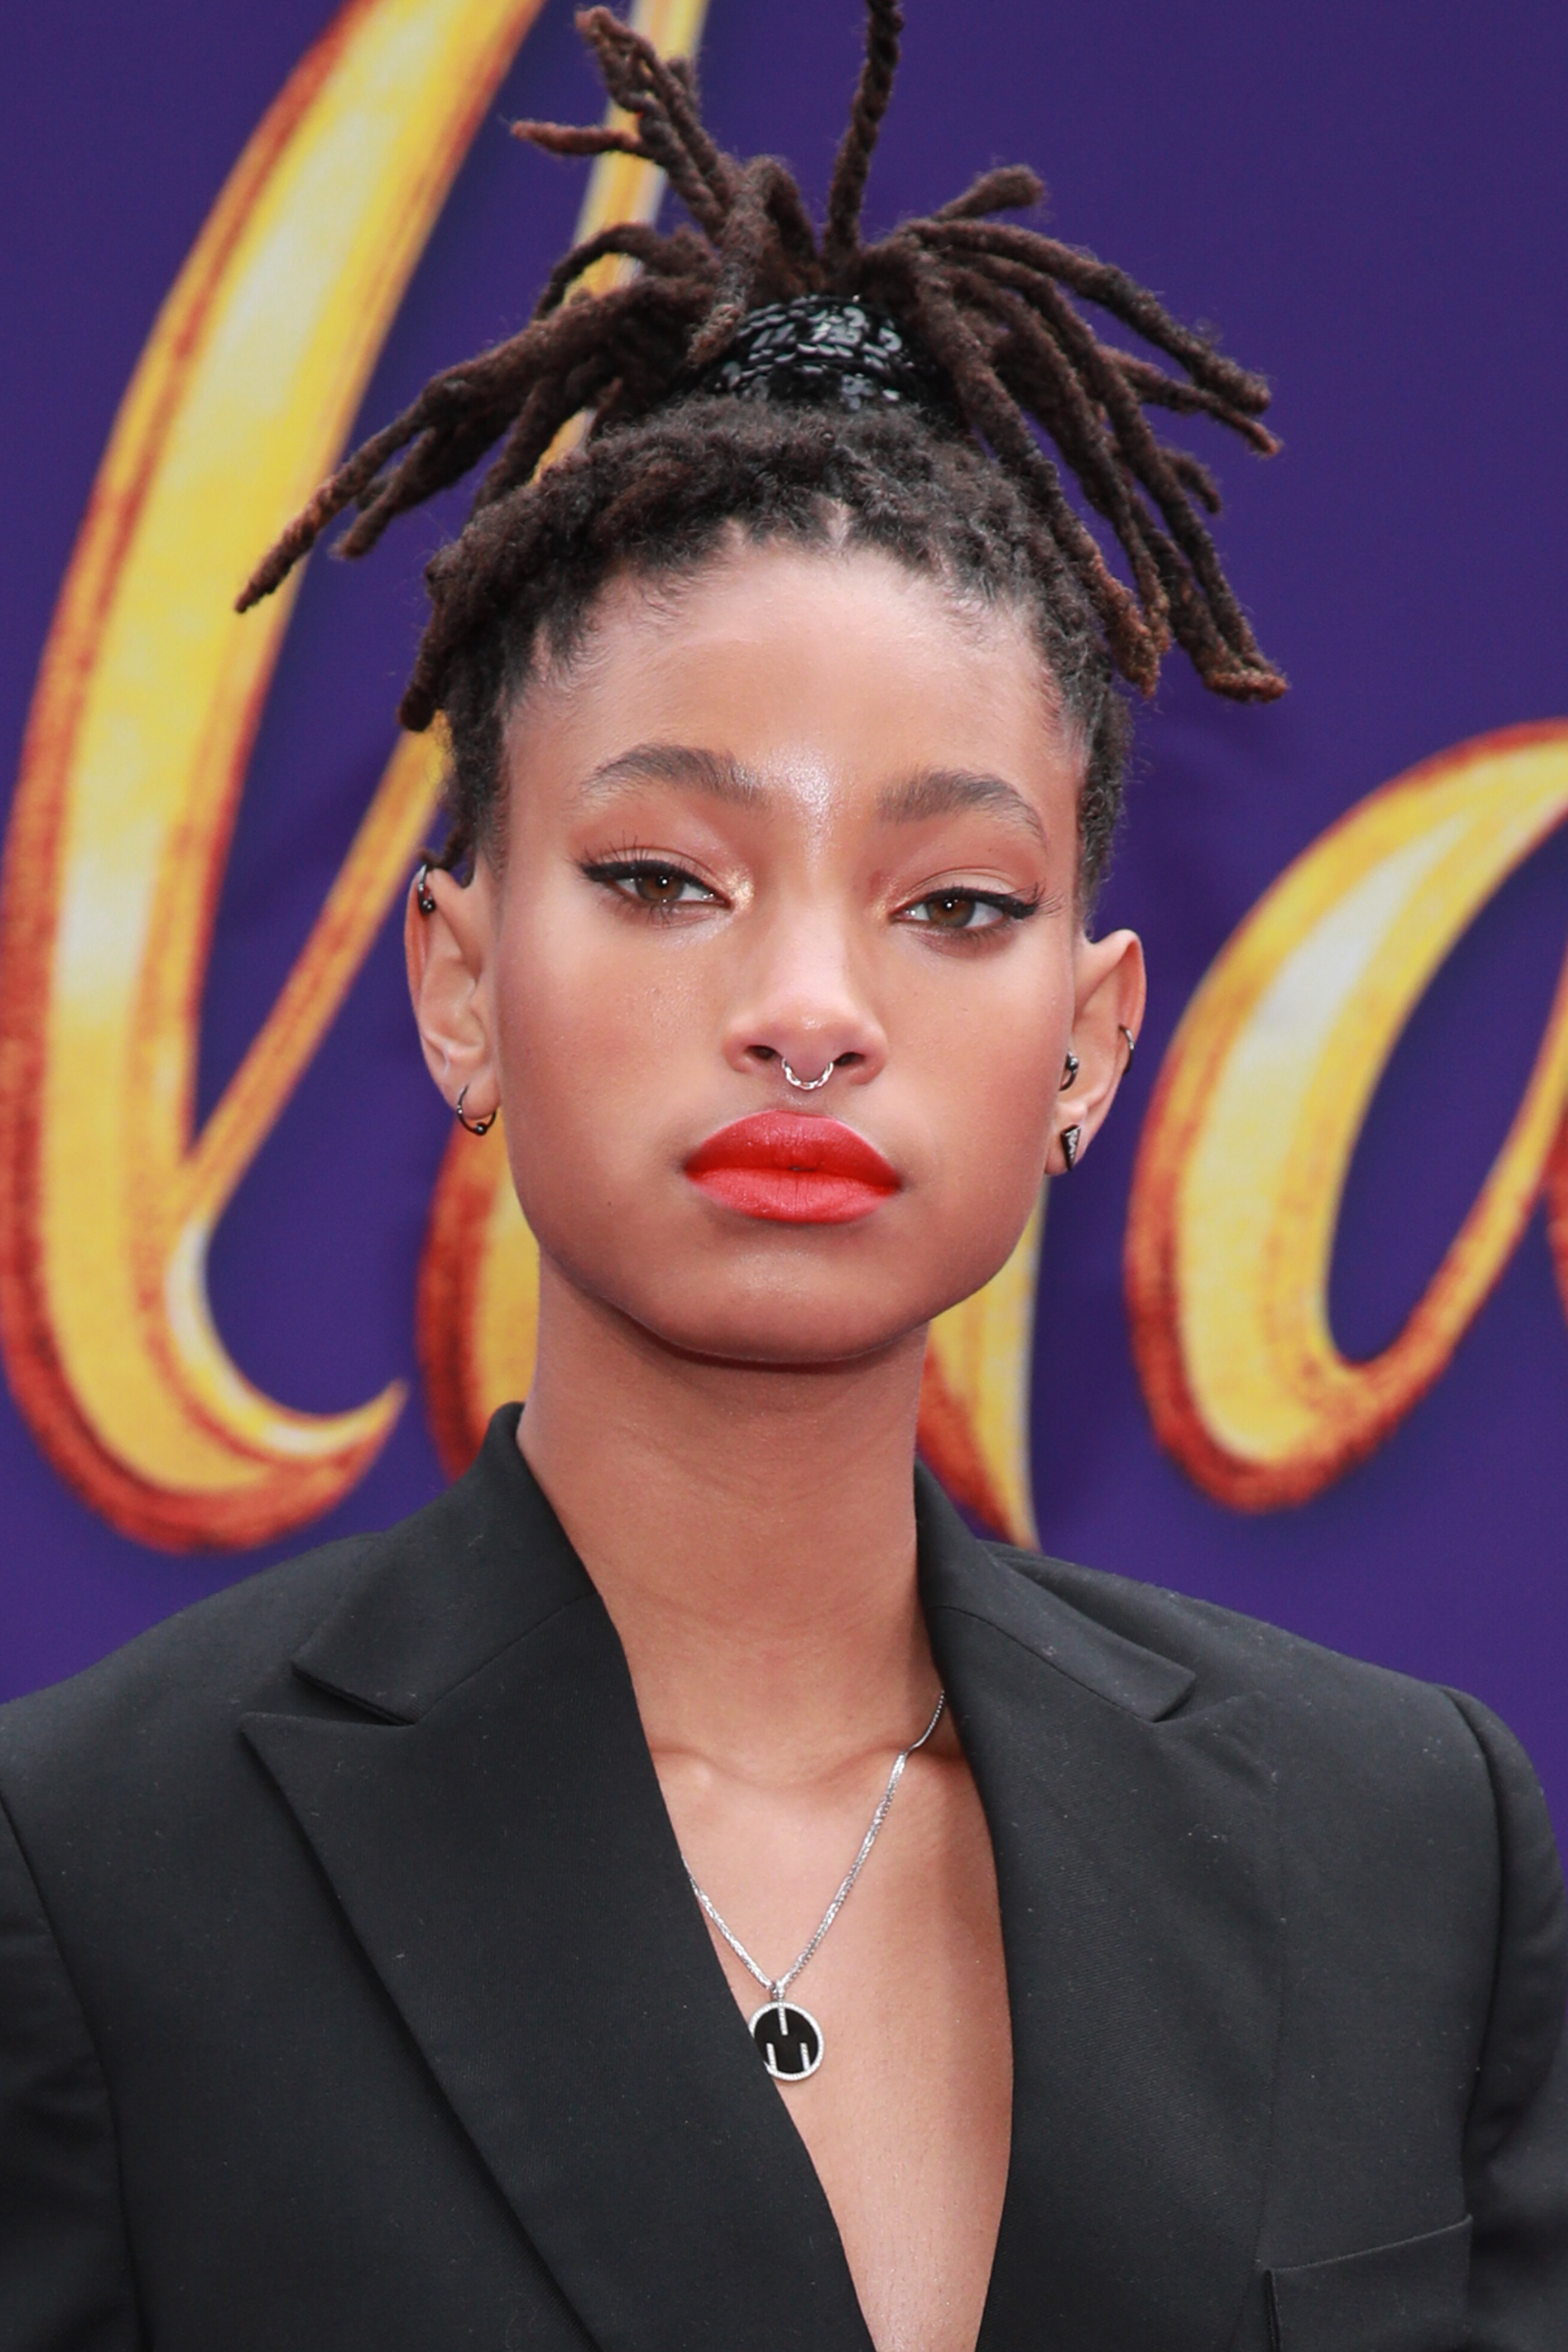 Willow Smith wearing a black blazer with a nose ring, styled hair, on a purple backdrop